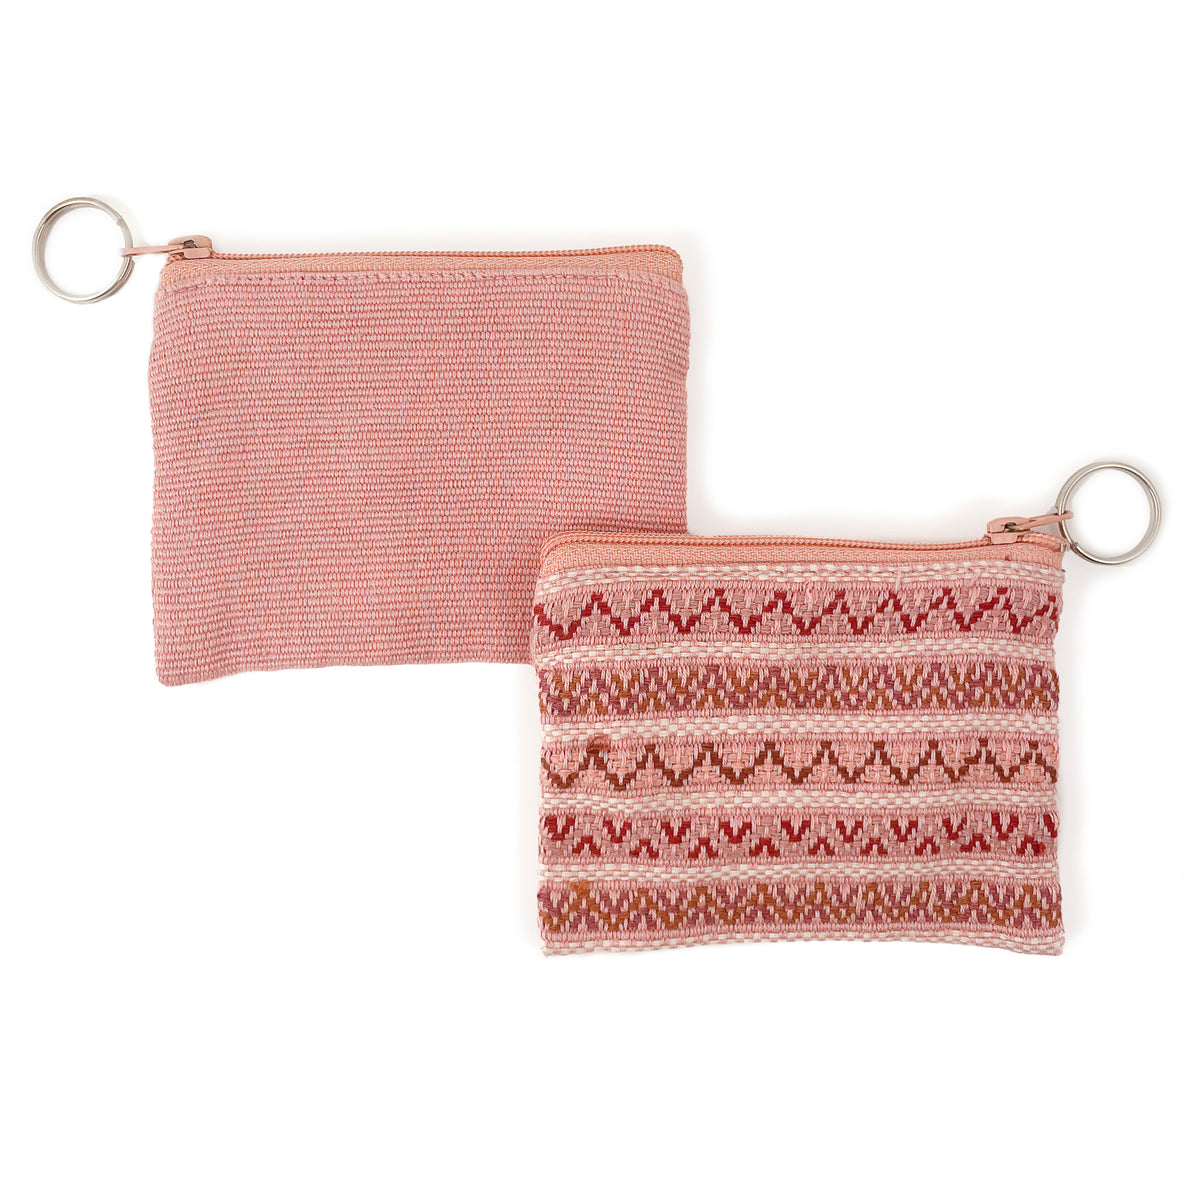 Flat lay of two blush brocade coin purses with key ring.  On the left, showing the backside of the bag, and on the right, showing the front side with brocade detail.